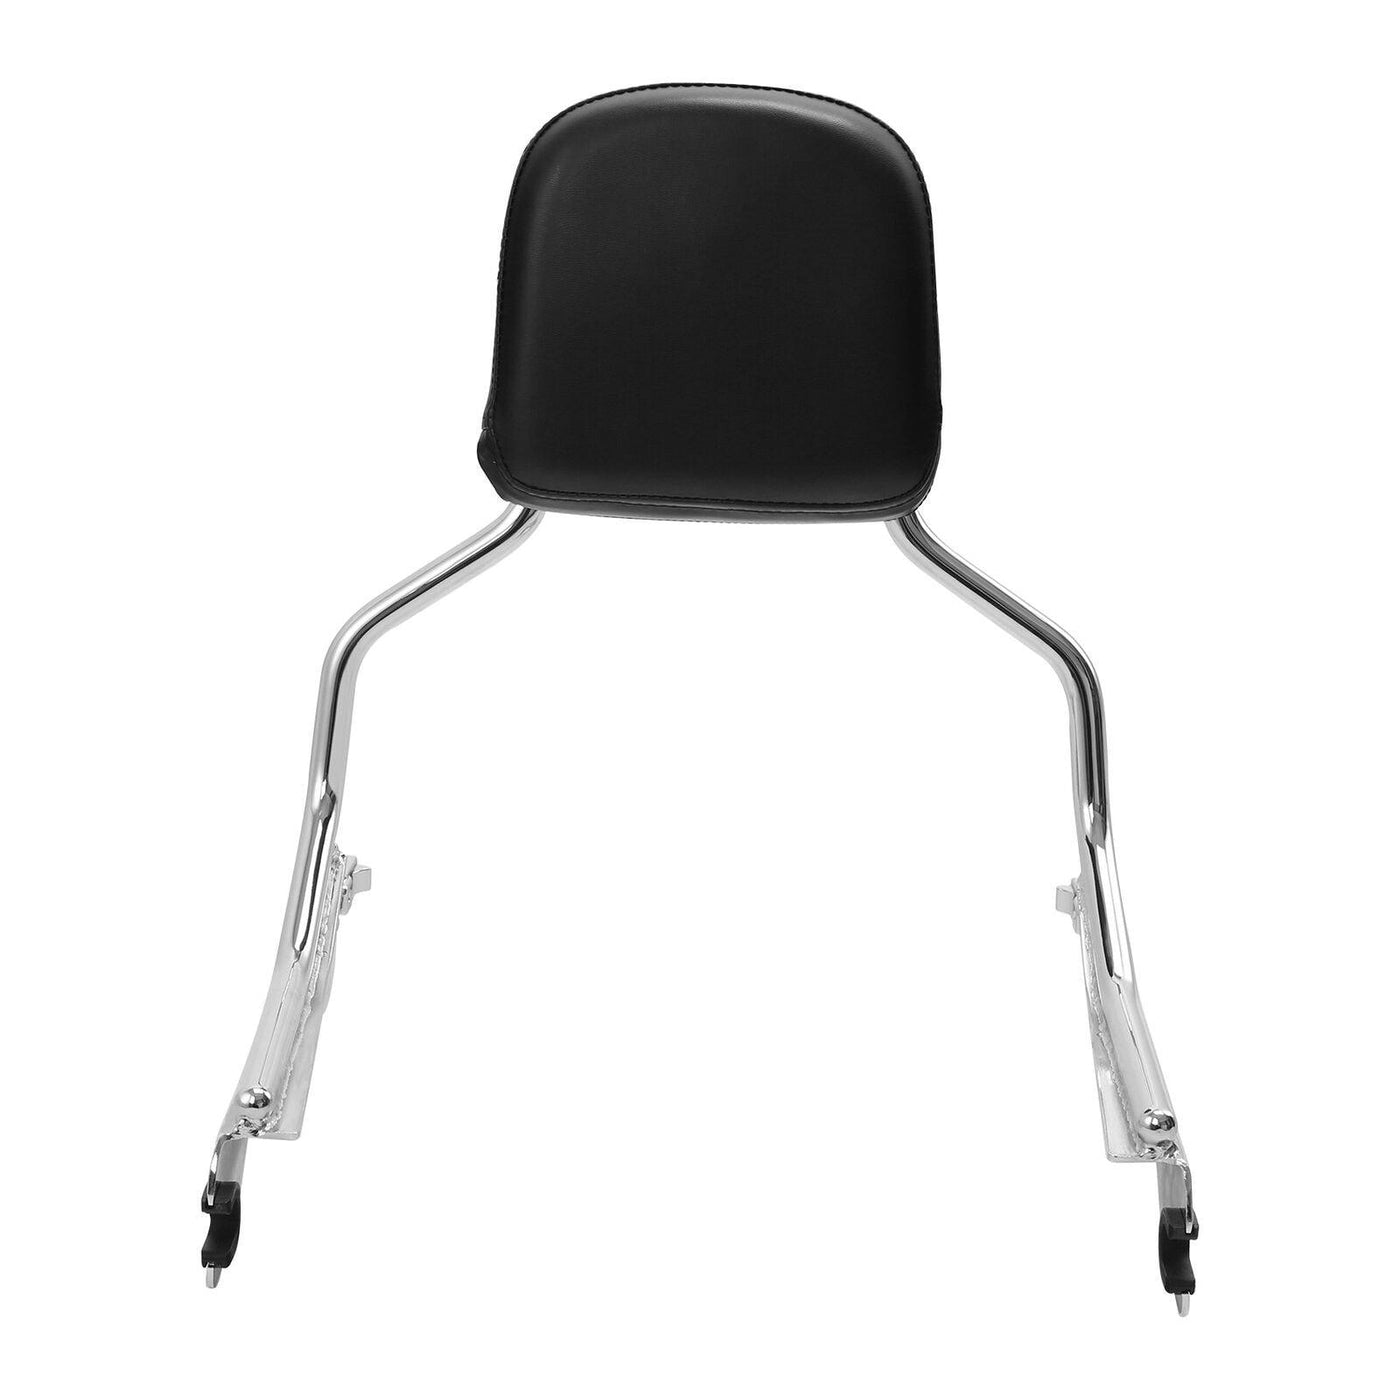 Sissy Bar Backrest Luggage Rack Fit For Harley Softail Fat Boy Breakout 18-21 - Moto Life Products